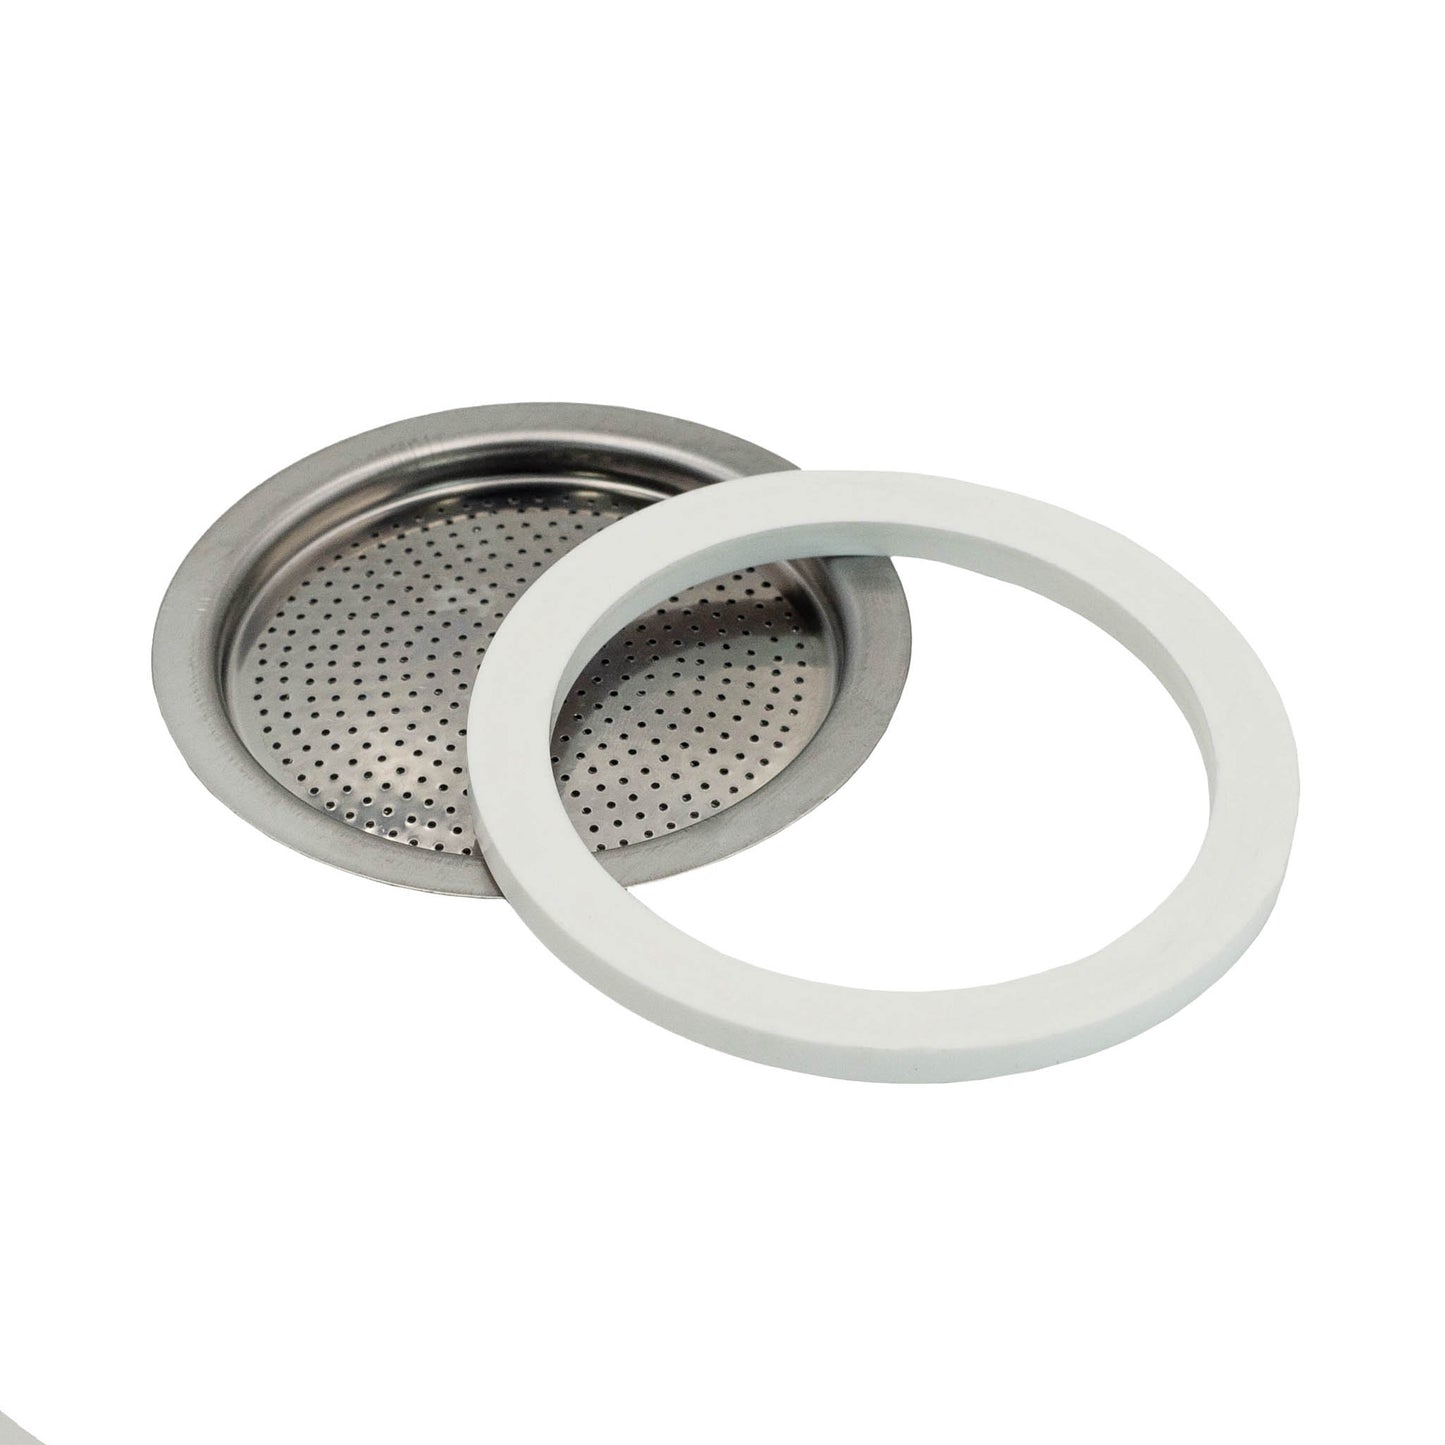 Bialetti Musa spare filter and seal for the Musa 2 cup espresso maker. Italian Made